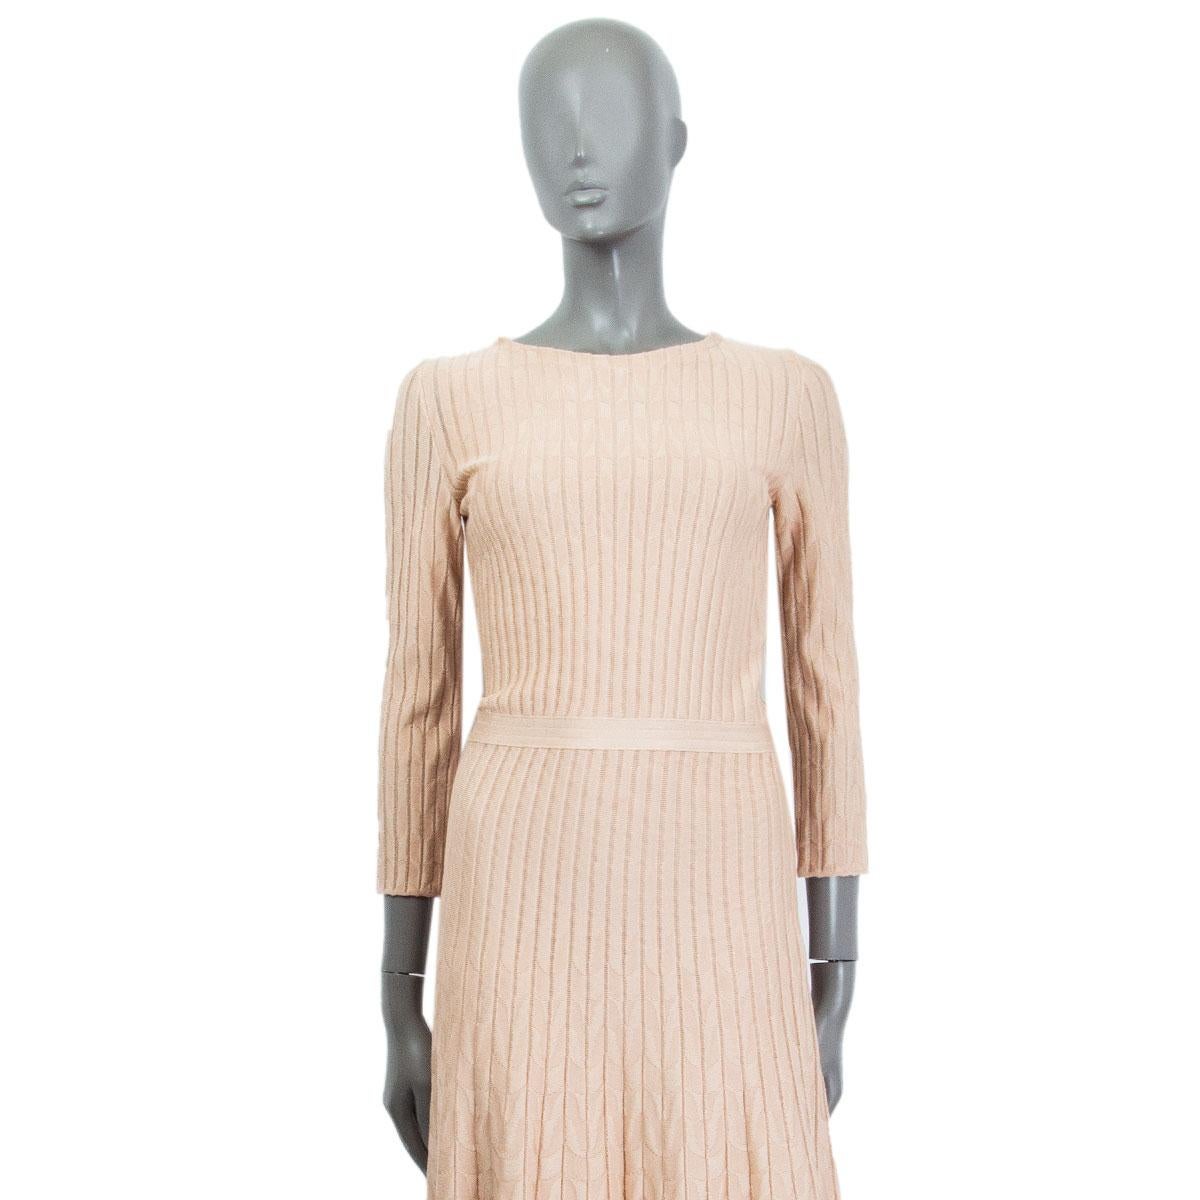 authentic Christian Dior A-line knit dress in nude viscose (70%), cotton (20%), polyamide (10%) with round neck-line and 3/4 length sleeves. Closes with a zipper at the side and has a waist-line band to underline the silhouette. Lined in nude